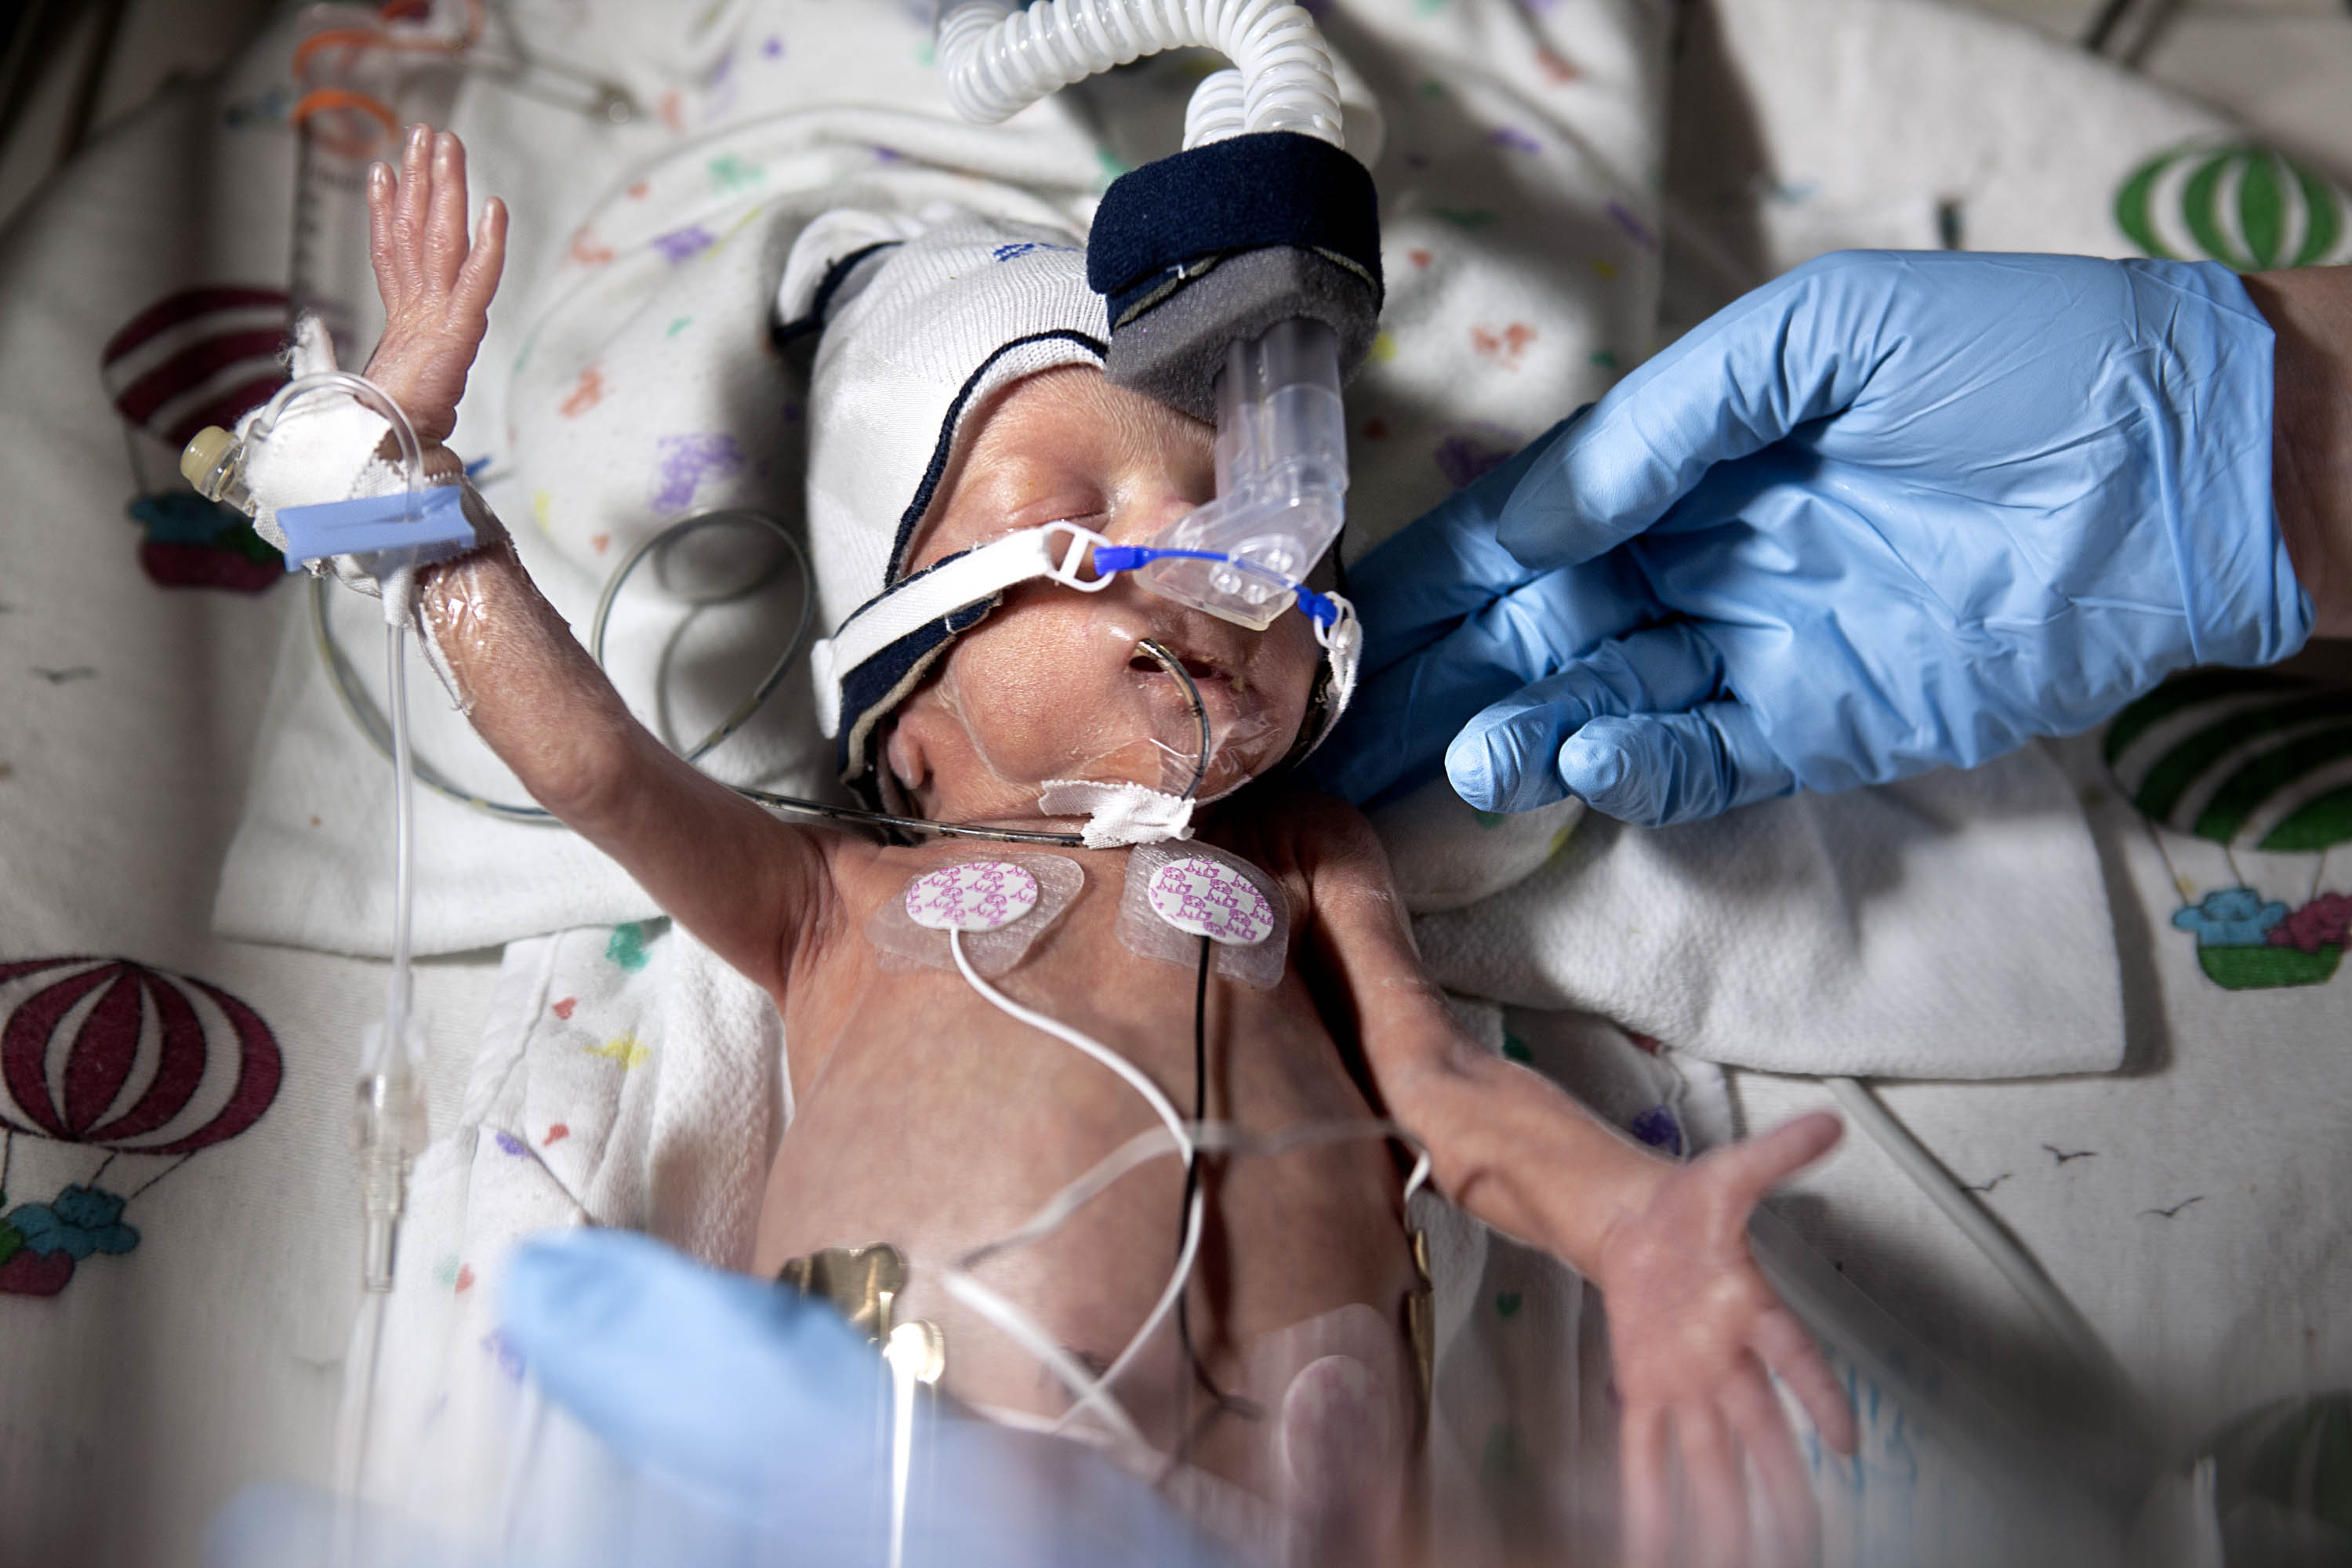 A Preemie Revolution  Cutting-edge medicine and dedicated  caregivers are helping the  tiniest babies survive— and thrive